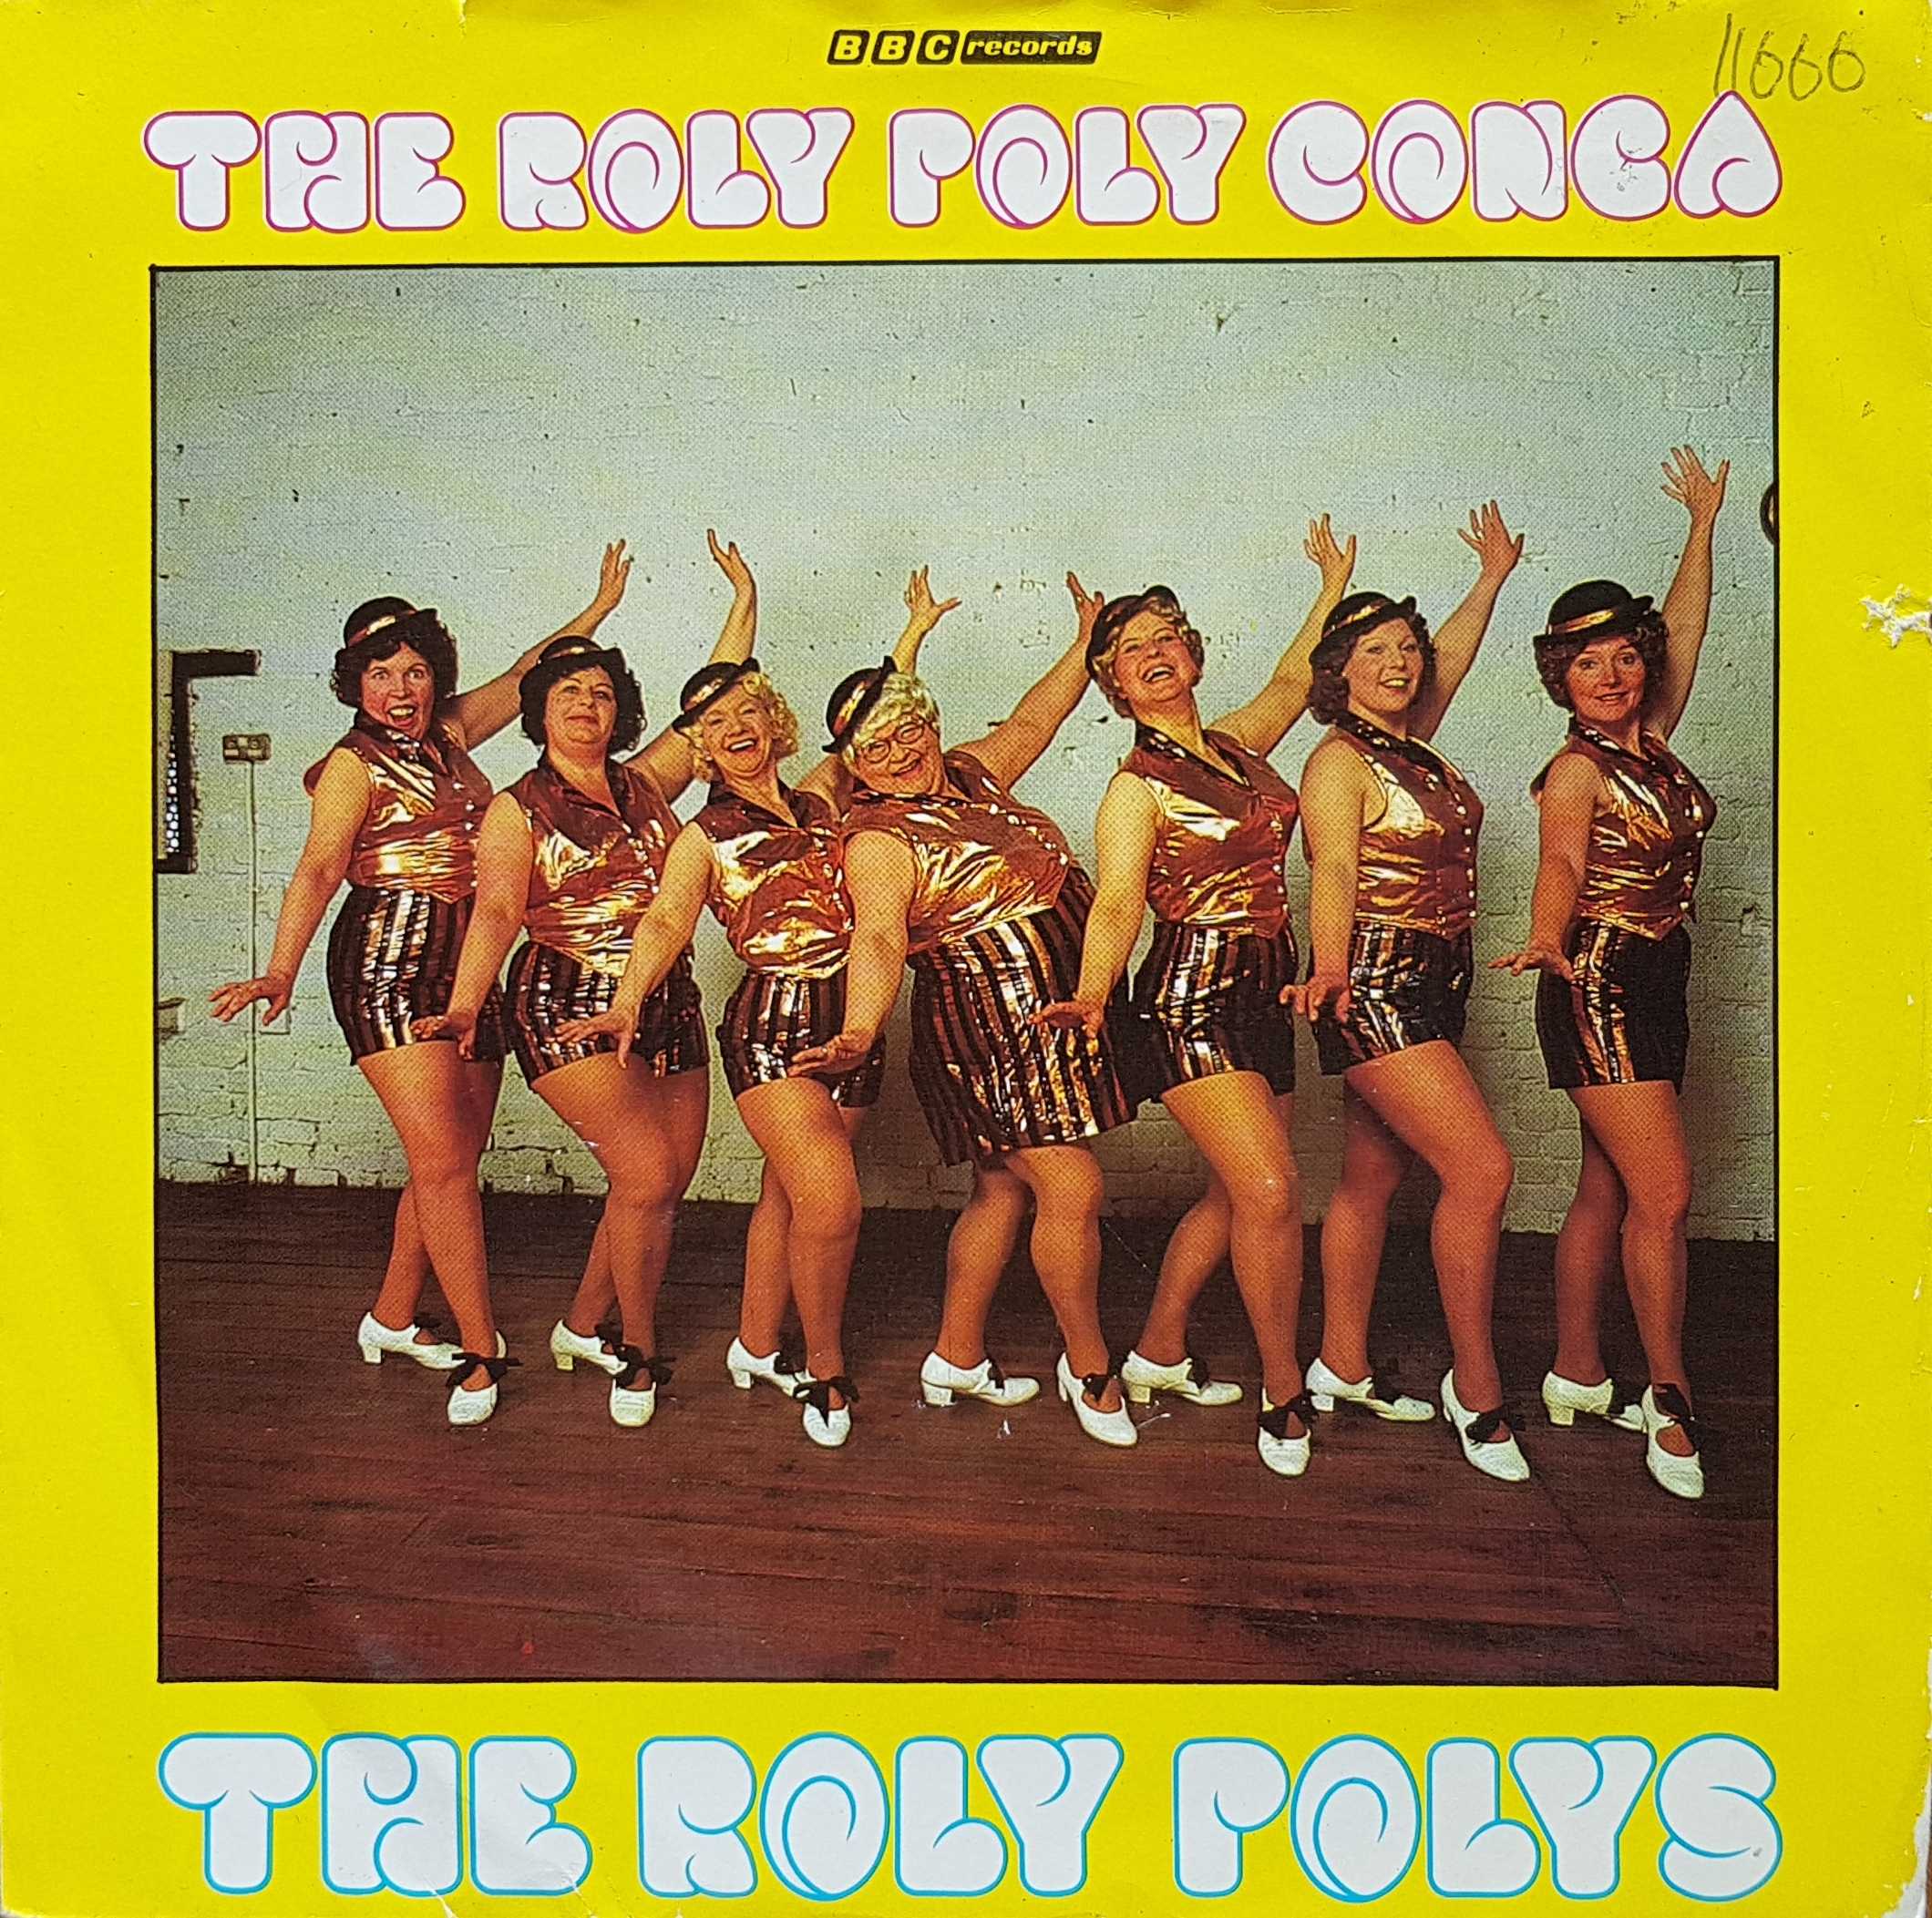 Picture of RESL 139 The roly poly conga by artist The Roly Polys from the BBC records and Tapes library